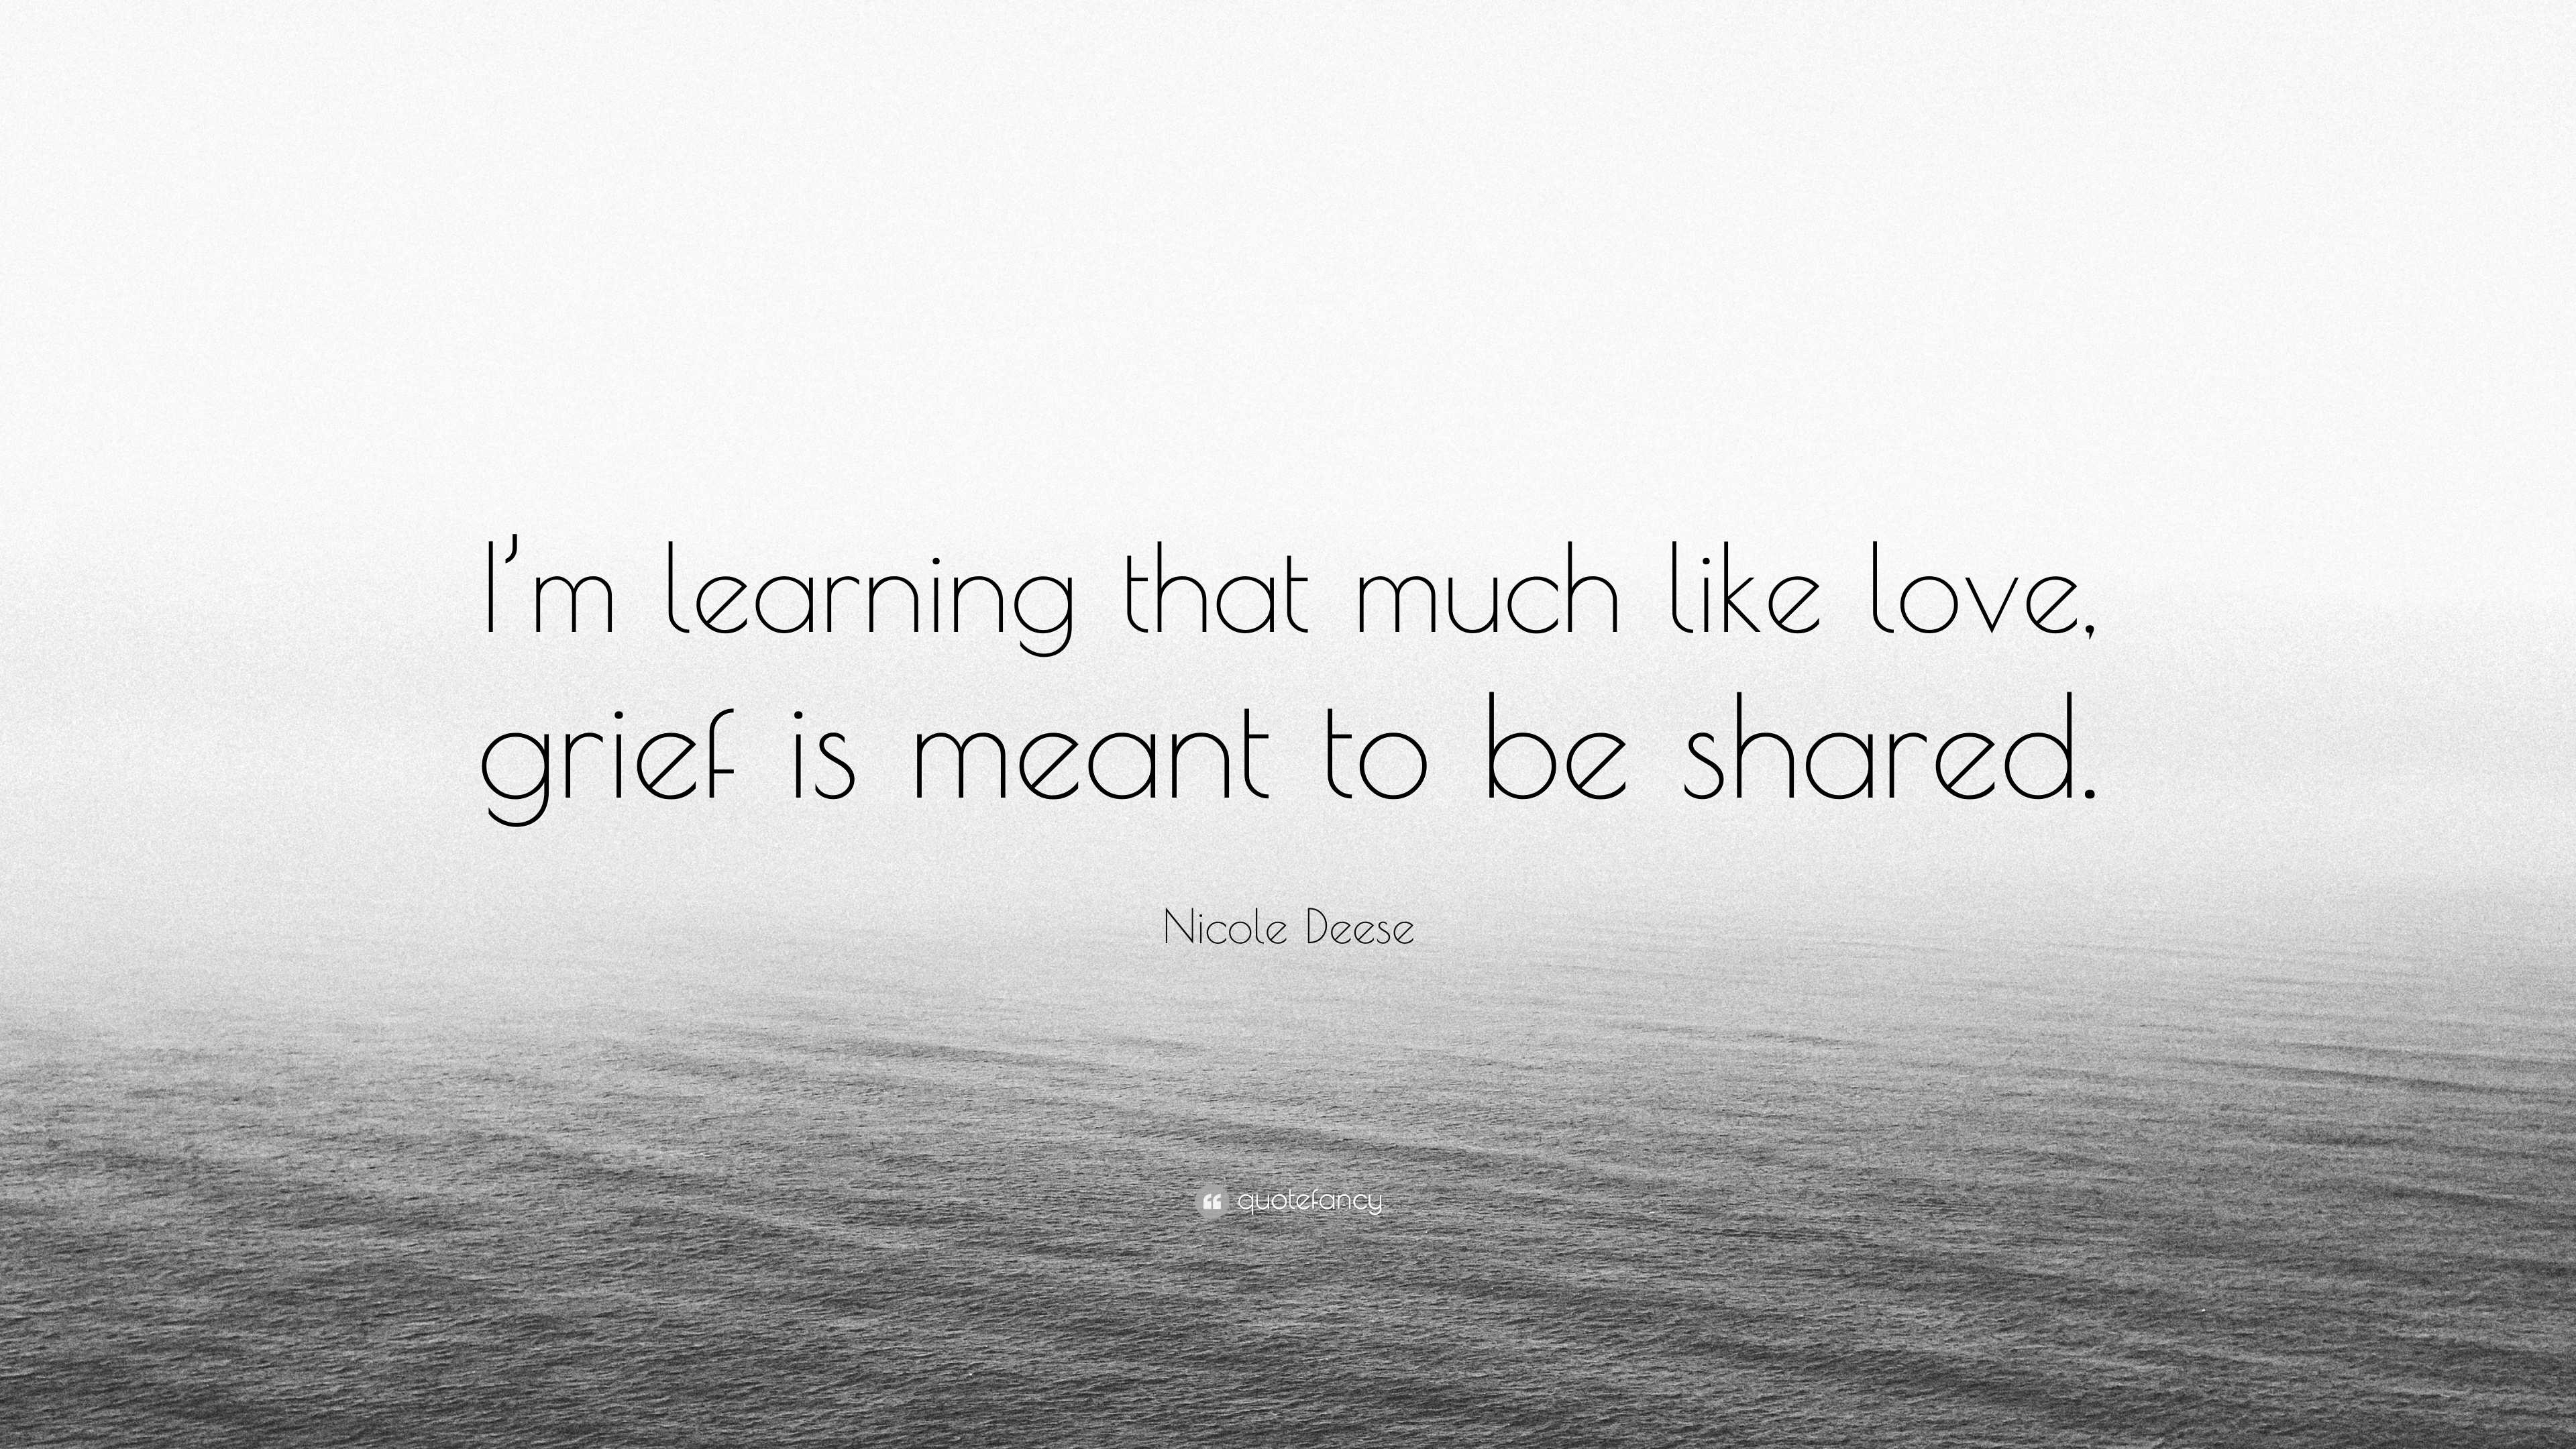 Nicole Deese Quote: “I’m learning that much like love, grief is meant ...